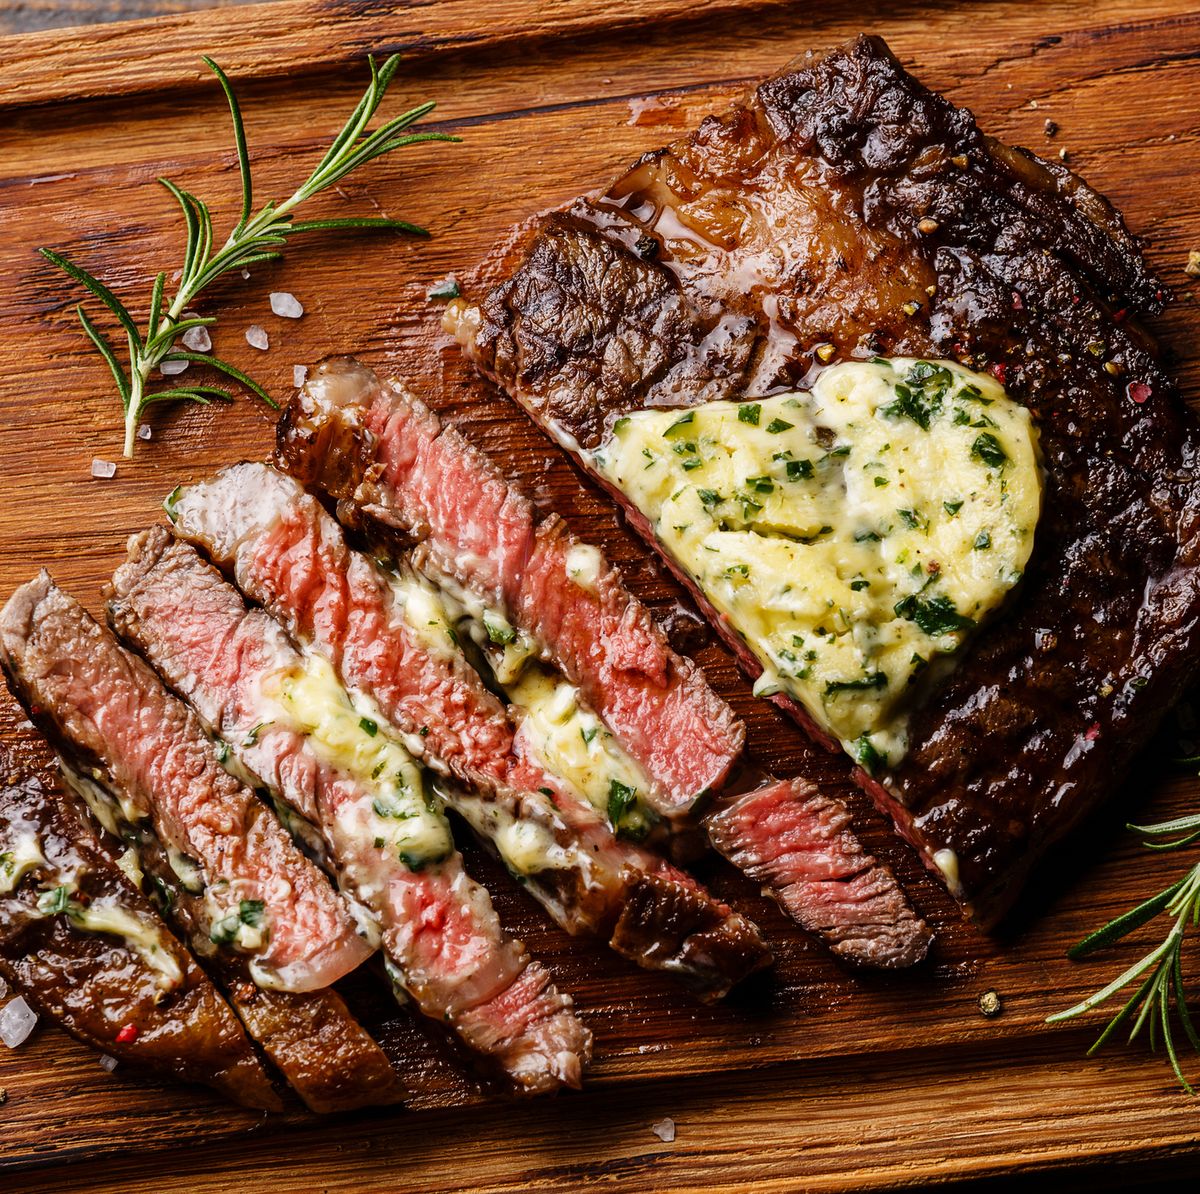 Sliced grilled steak Ribeye with herb butter